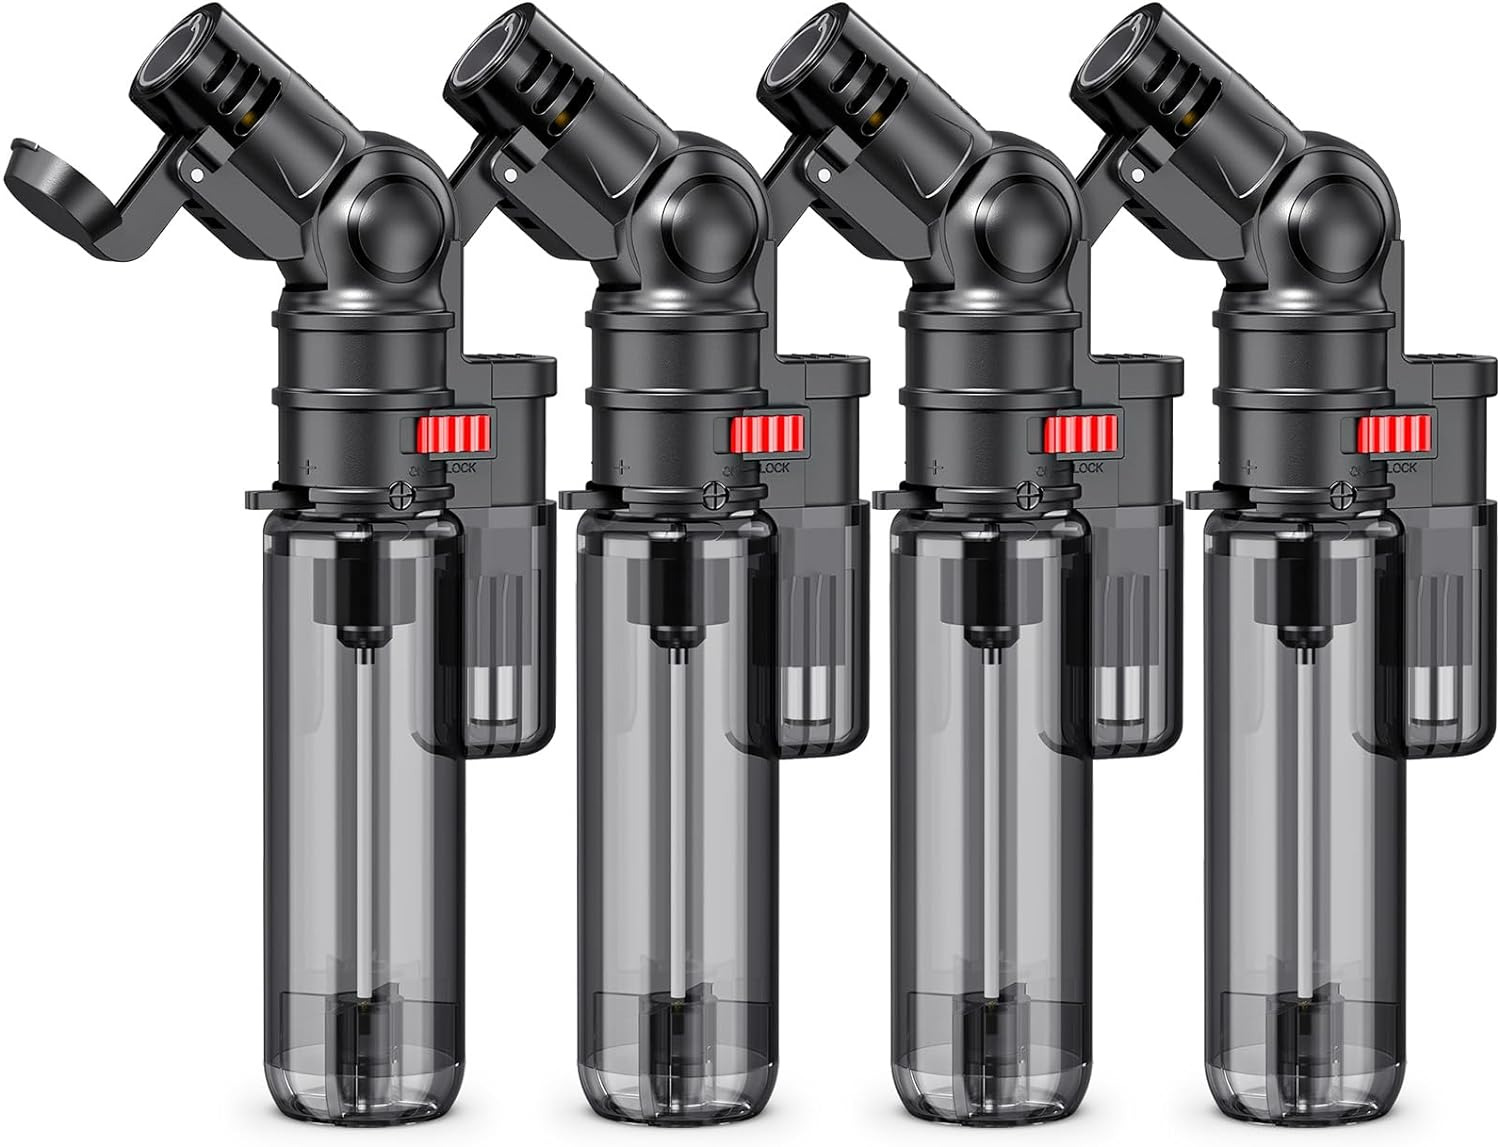 Torch Lighters 4 Pack Butane Refillable Torch Lighter Rotatable Head Windproof